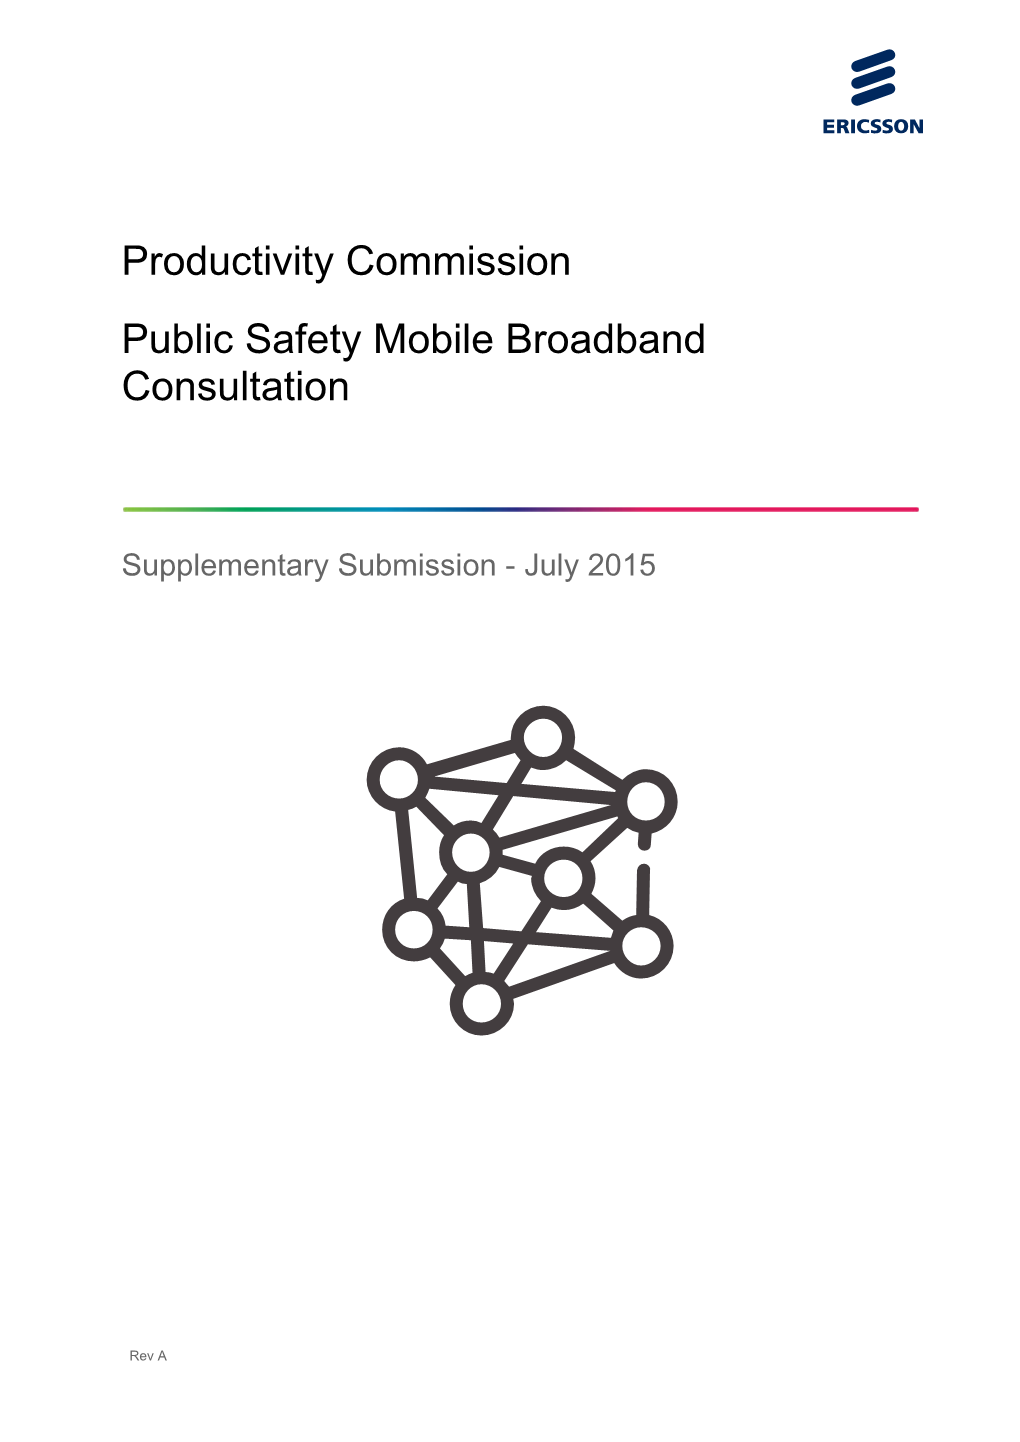 Ericsson Australia Welcomes the Opportunity to Respond to the Productivity Commission Supplementary Questions Received 10 July 2015